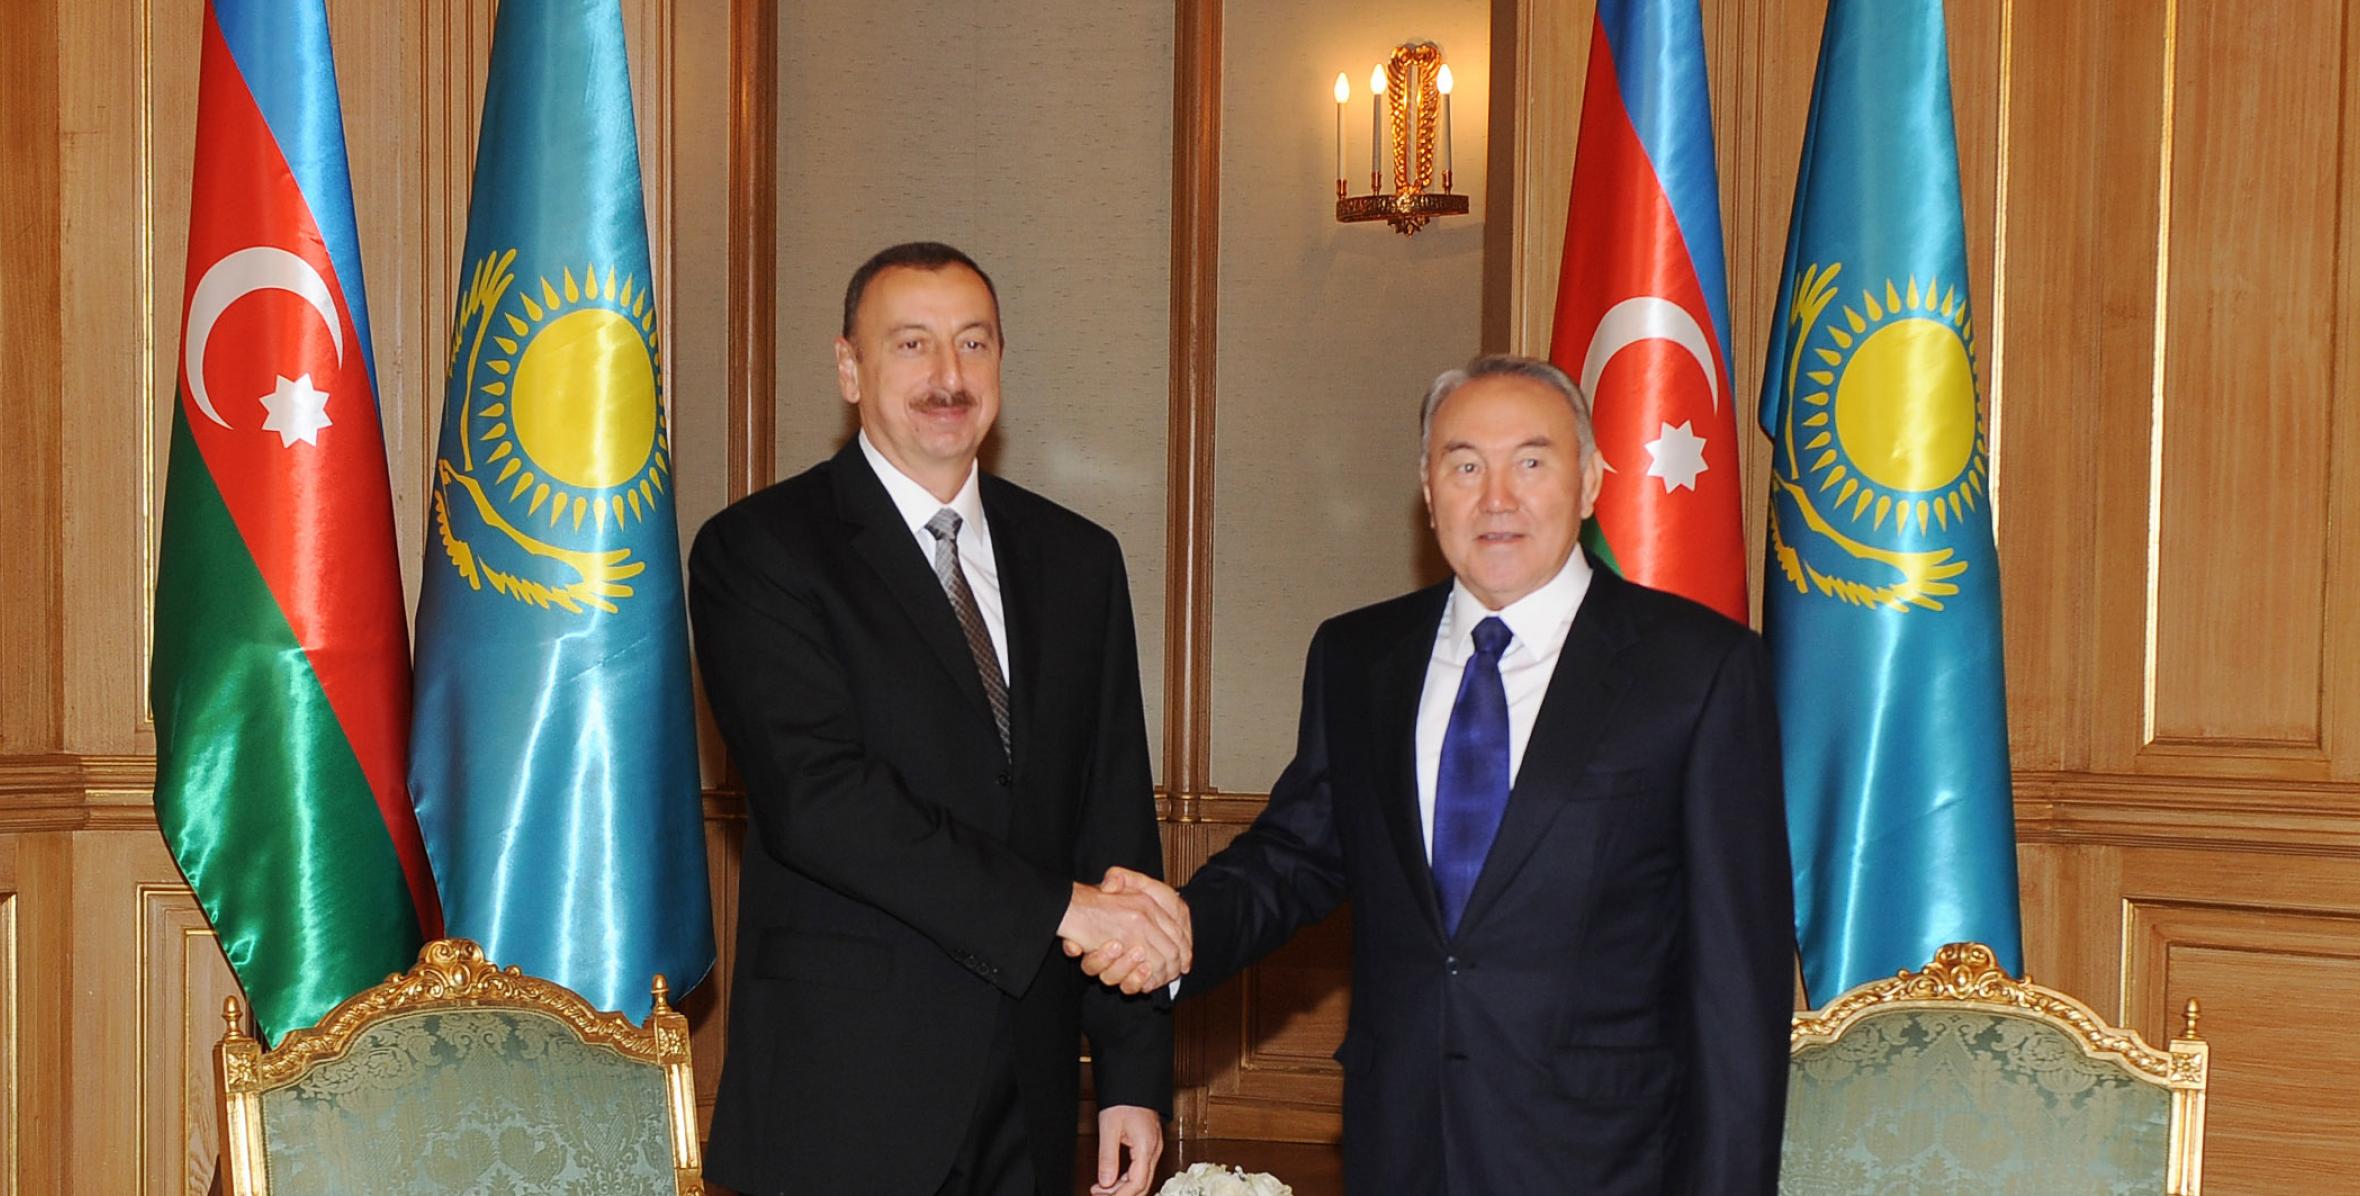 Ilham Aliyev had a face-to-face meeting with President of Kazakhstan Nursultan Nazarbayev